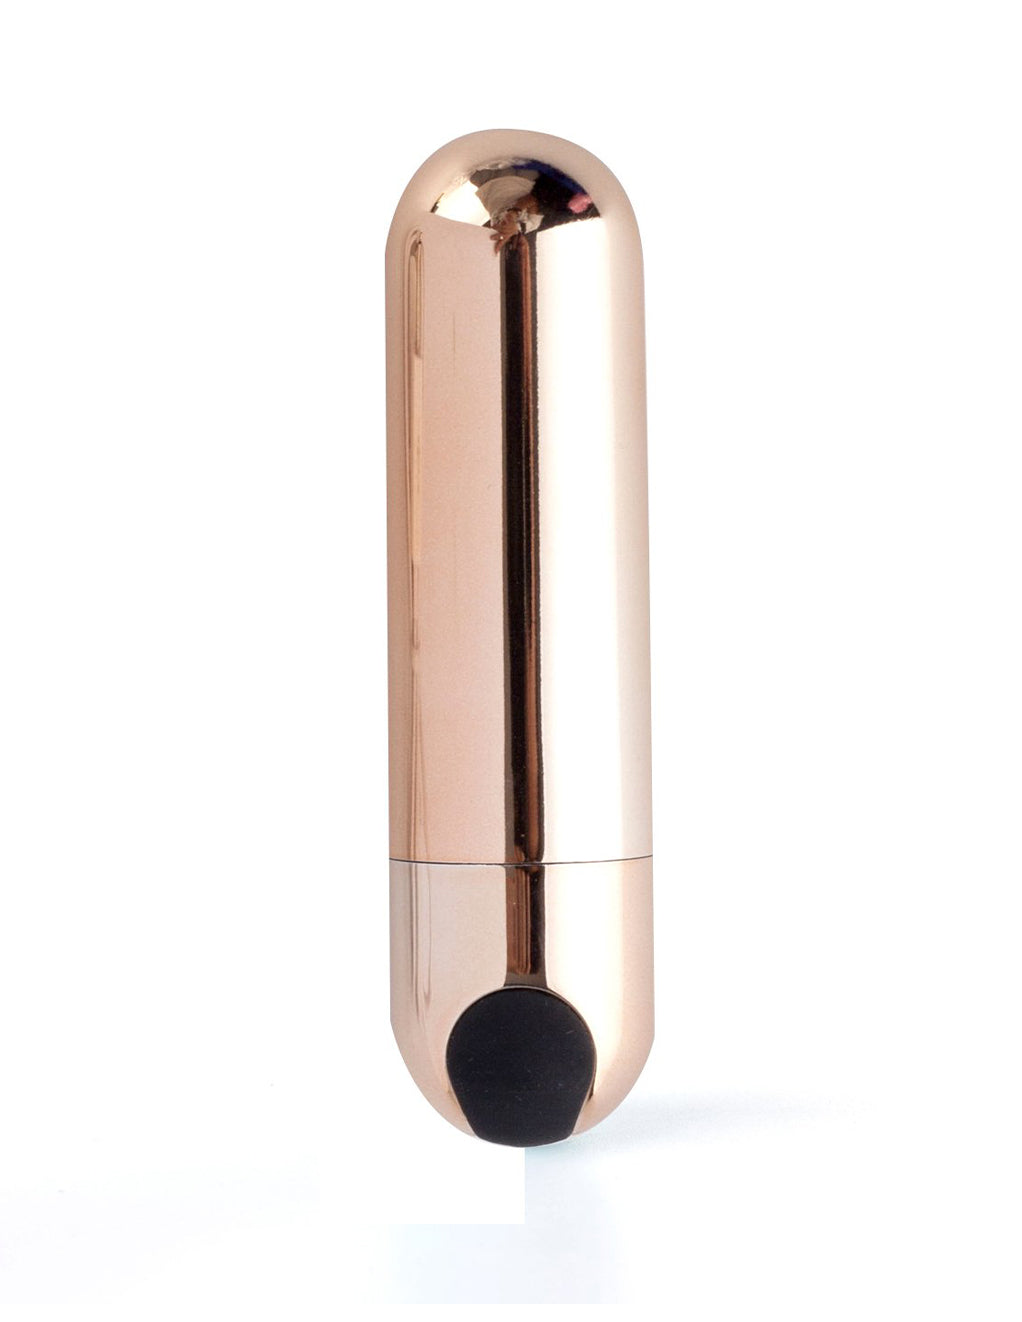 https://cdn.shopify.com/s/files/1/1221/0120/products/330-RG_MAIA_JESSI_SUPER_CHARGED_MINI_BULLET_ROSE_GOLD_front.jpg?v=1583437364